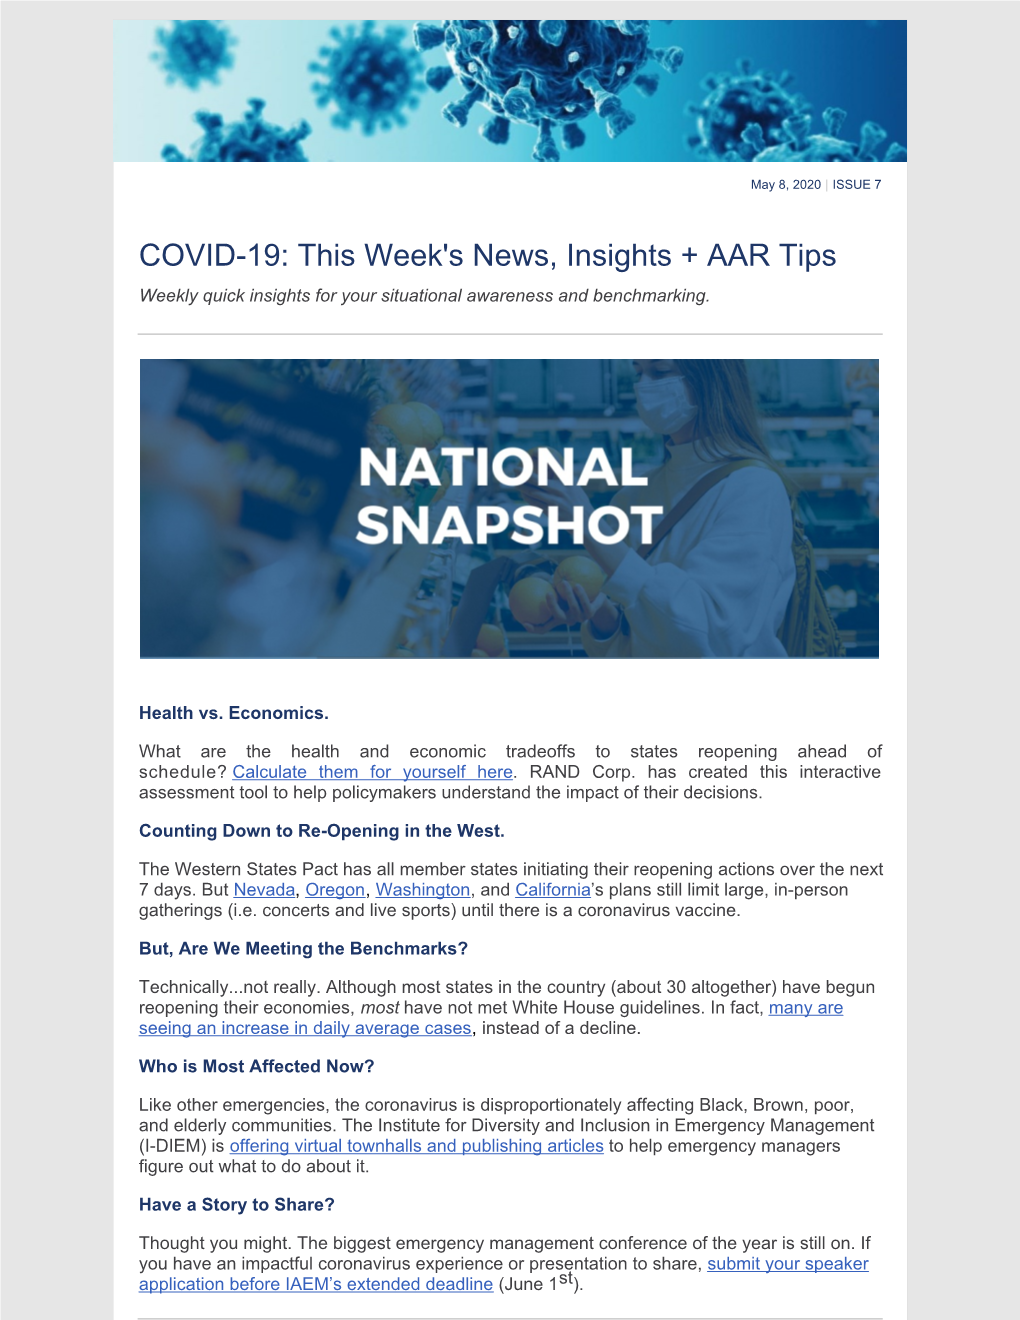 COVID-19: This Week's News, Insights + AAR Tips Weekly Quick Insights for Your Situational Awareness and Benchmarking